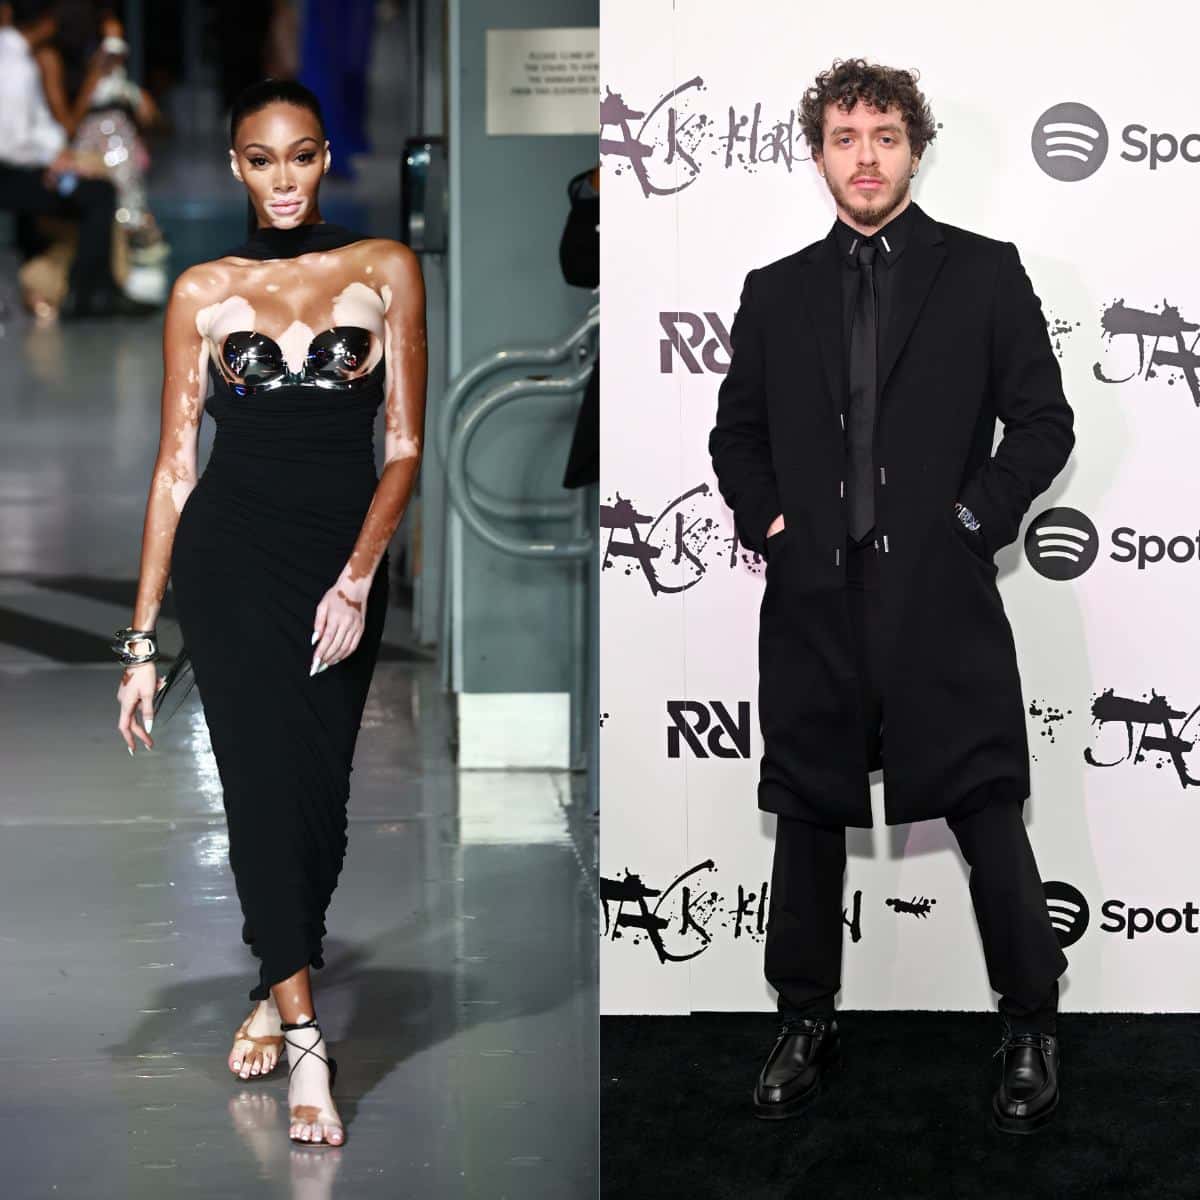 Are Winnie Harlow and Jack Harlow related